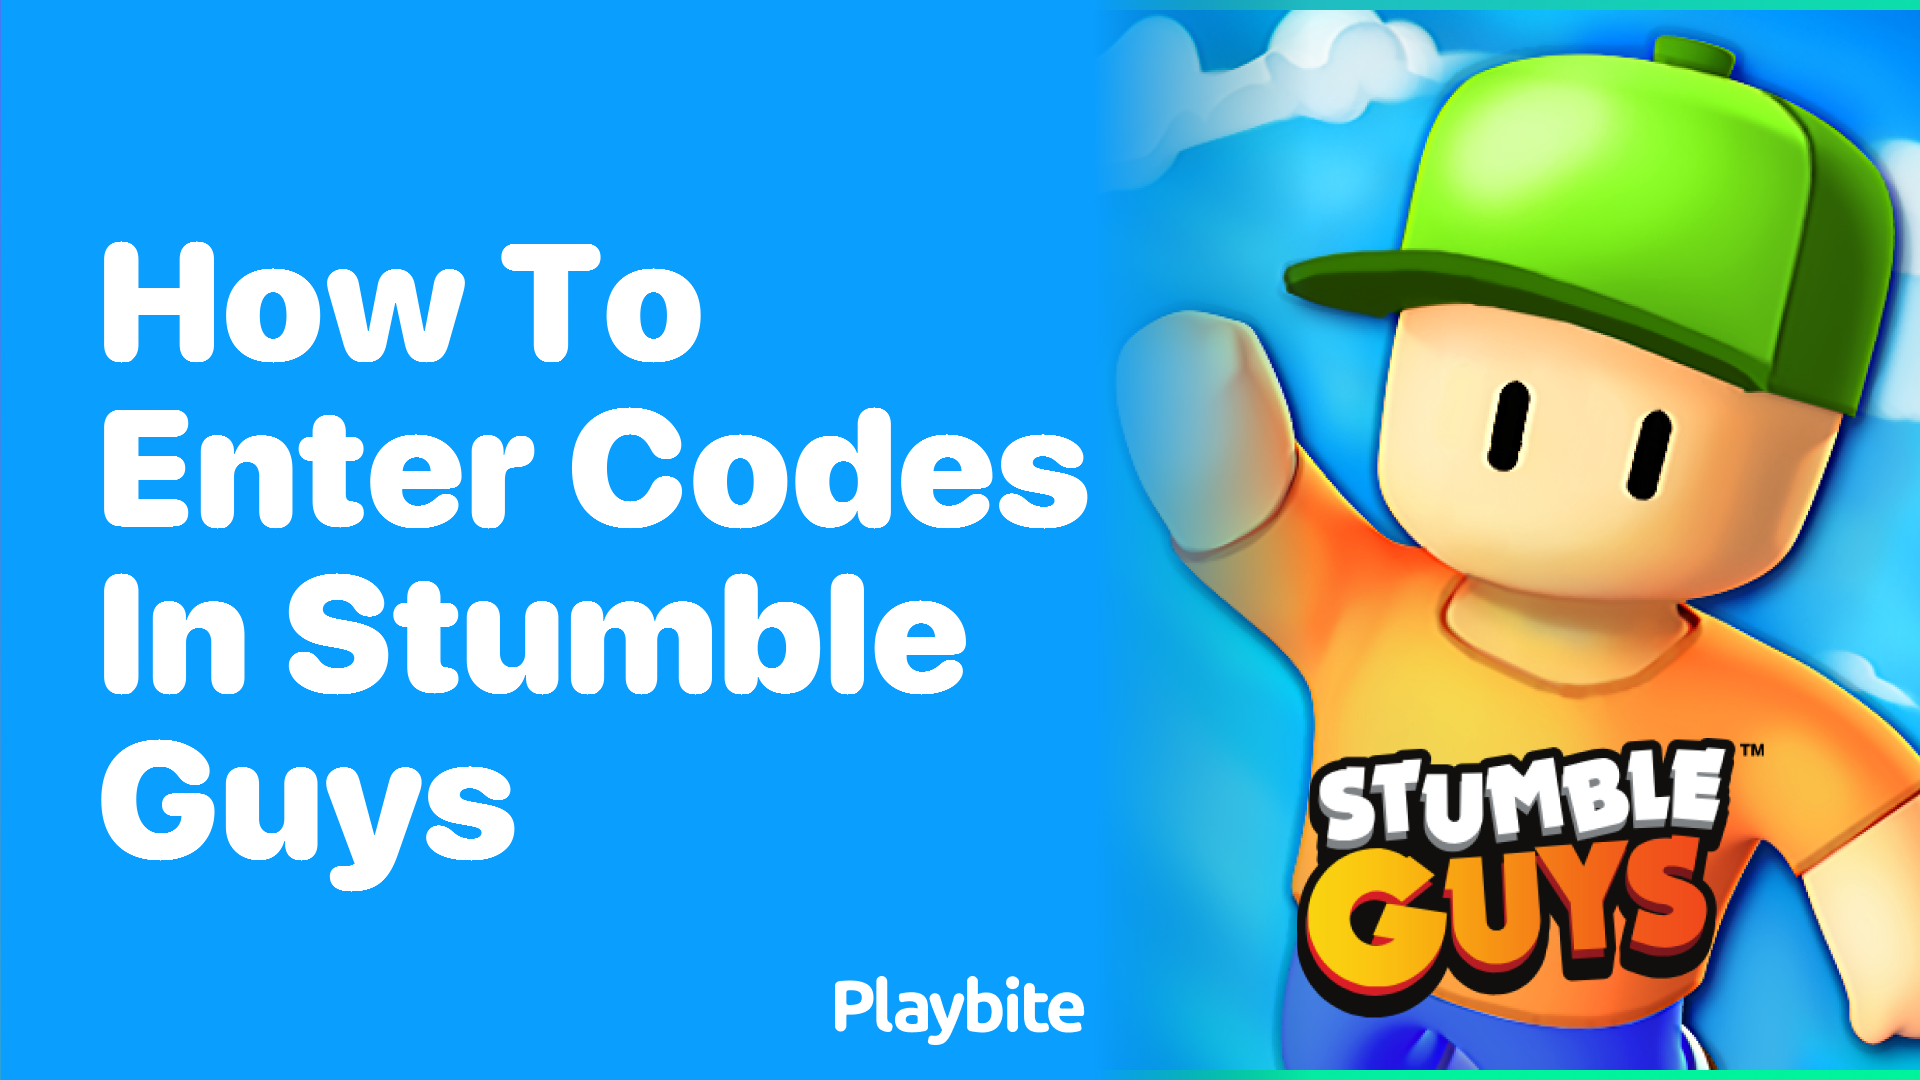 How to Enter Codes in Stumble Guys: An Easy Guide